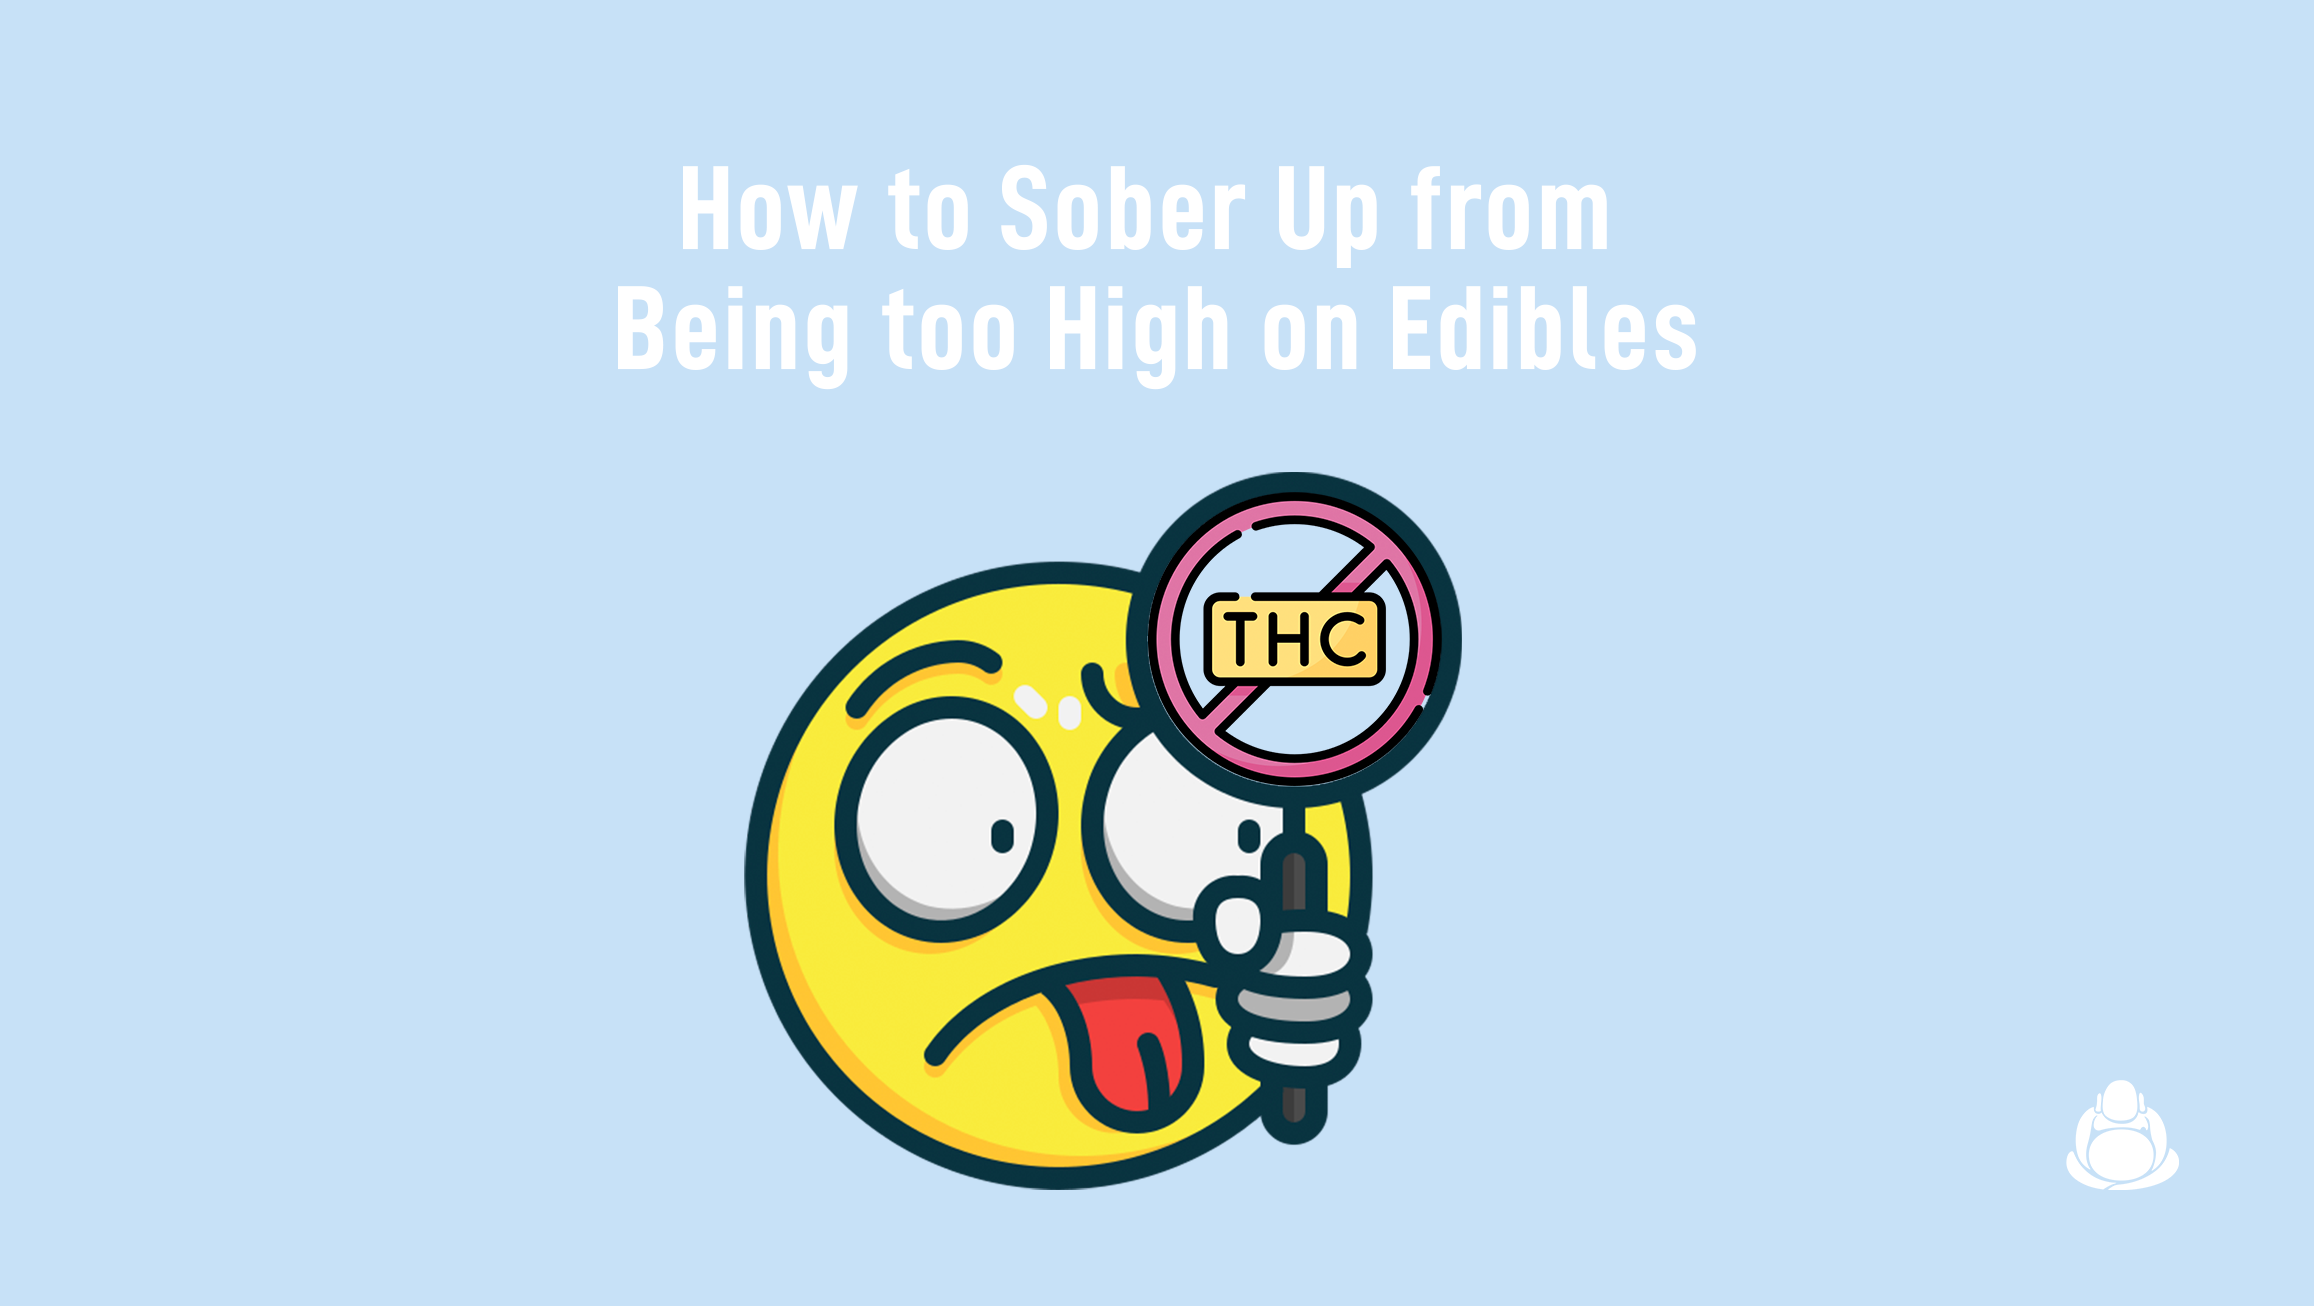 How to Sober Up from Being too High on Edibles